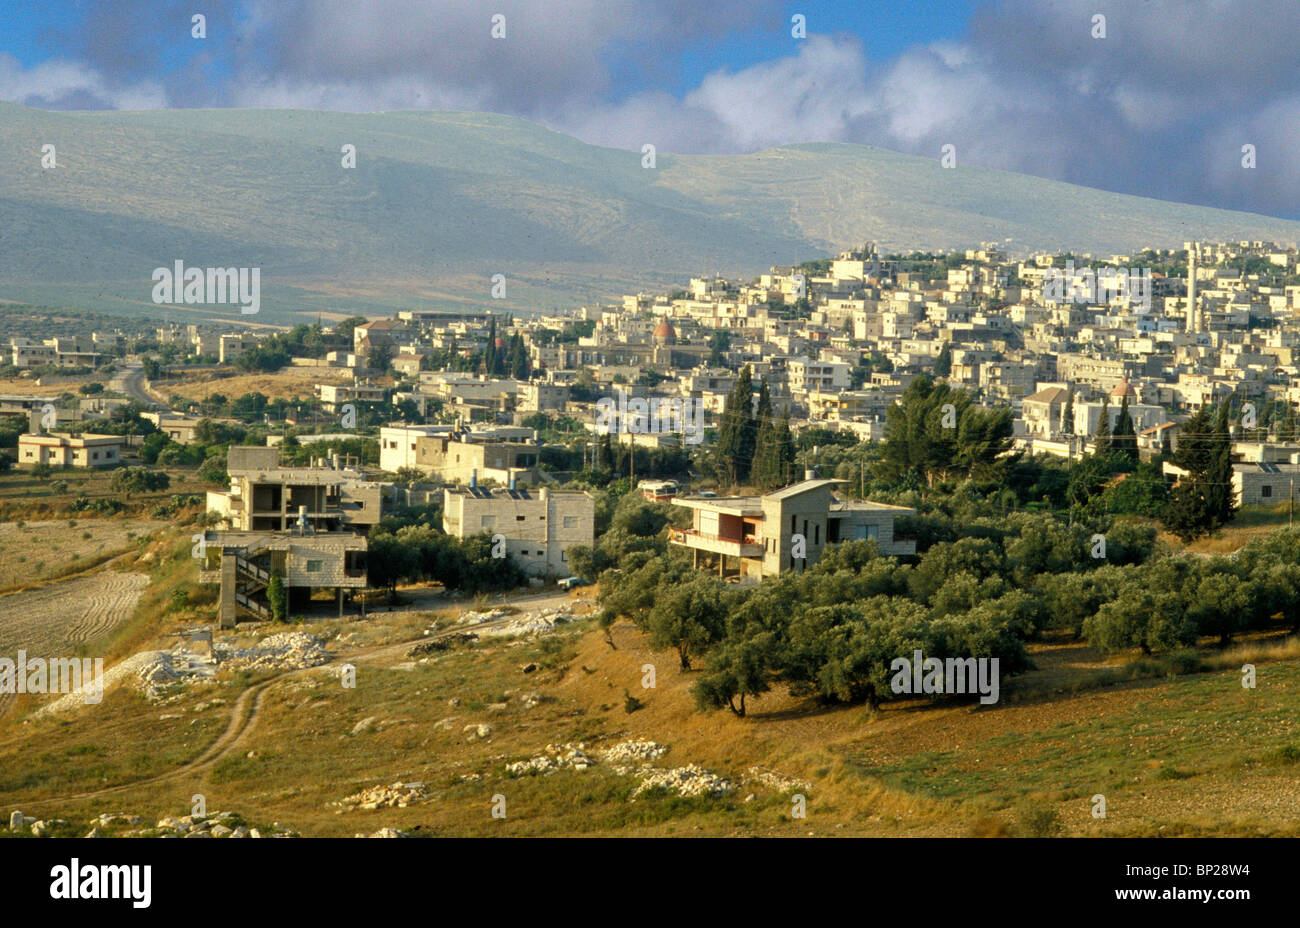 CANA, GENERAL VIEW OF TODAY'S VILLAGE OF CANA IN GALILEE Stock Photo